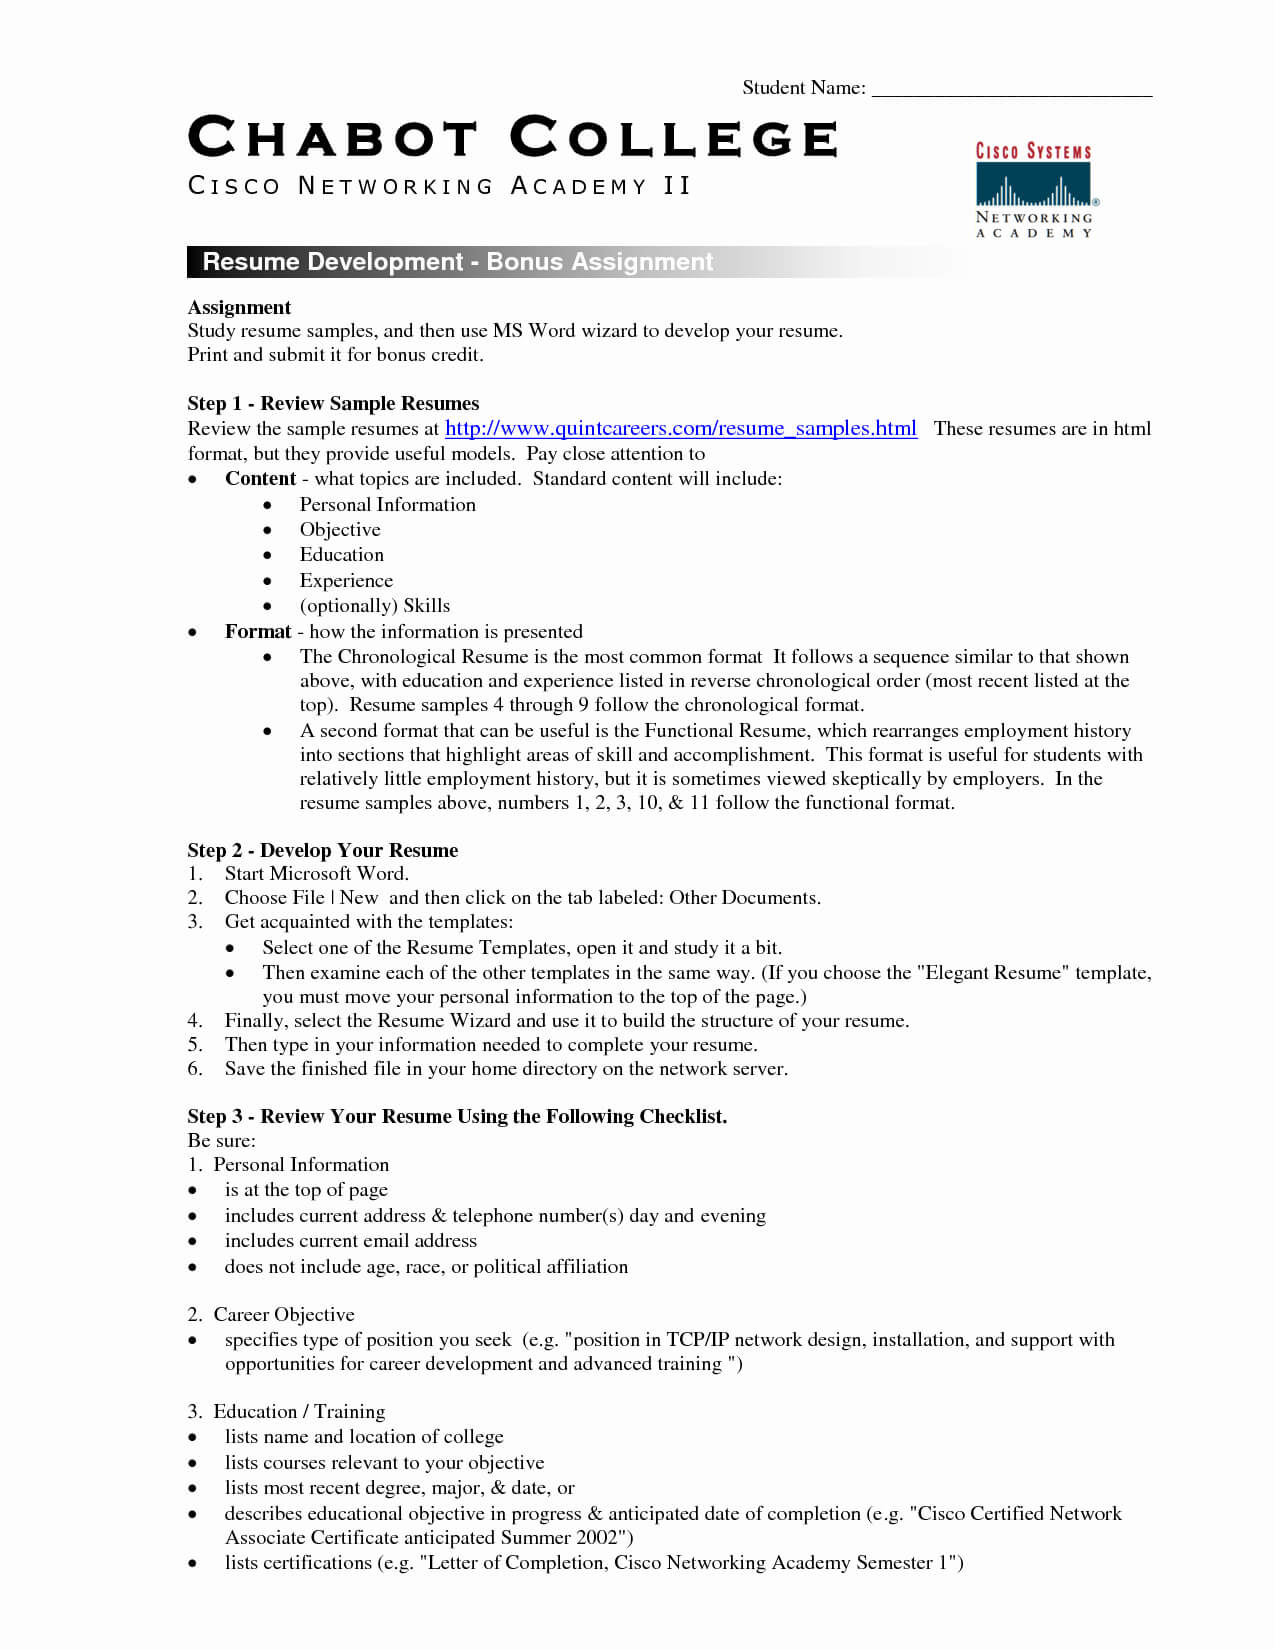 Free Student Resume Templates Microsoft Word – Vemquetem Pertaining To College Student Resume Template Microsoft Word